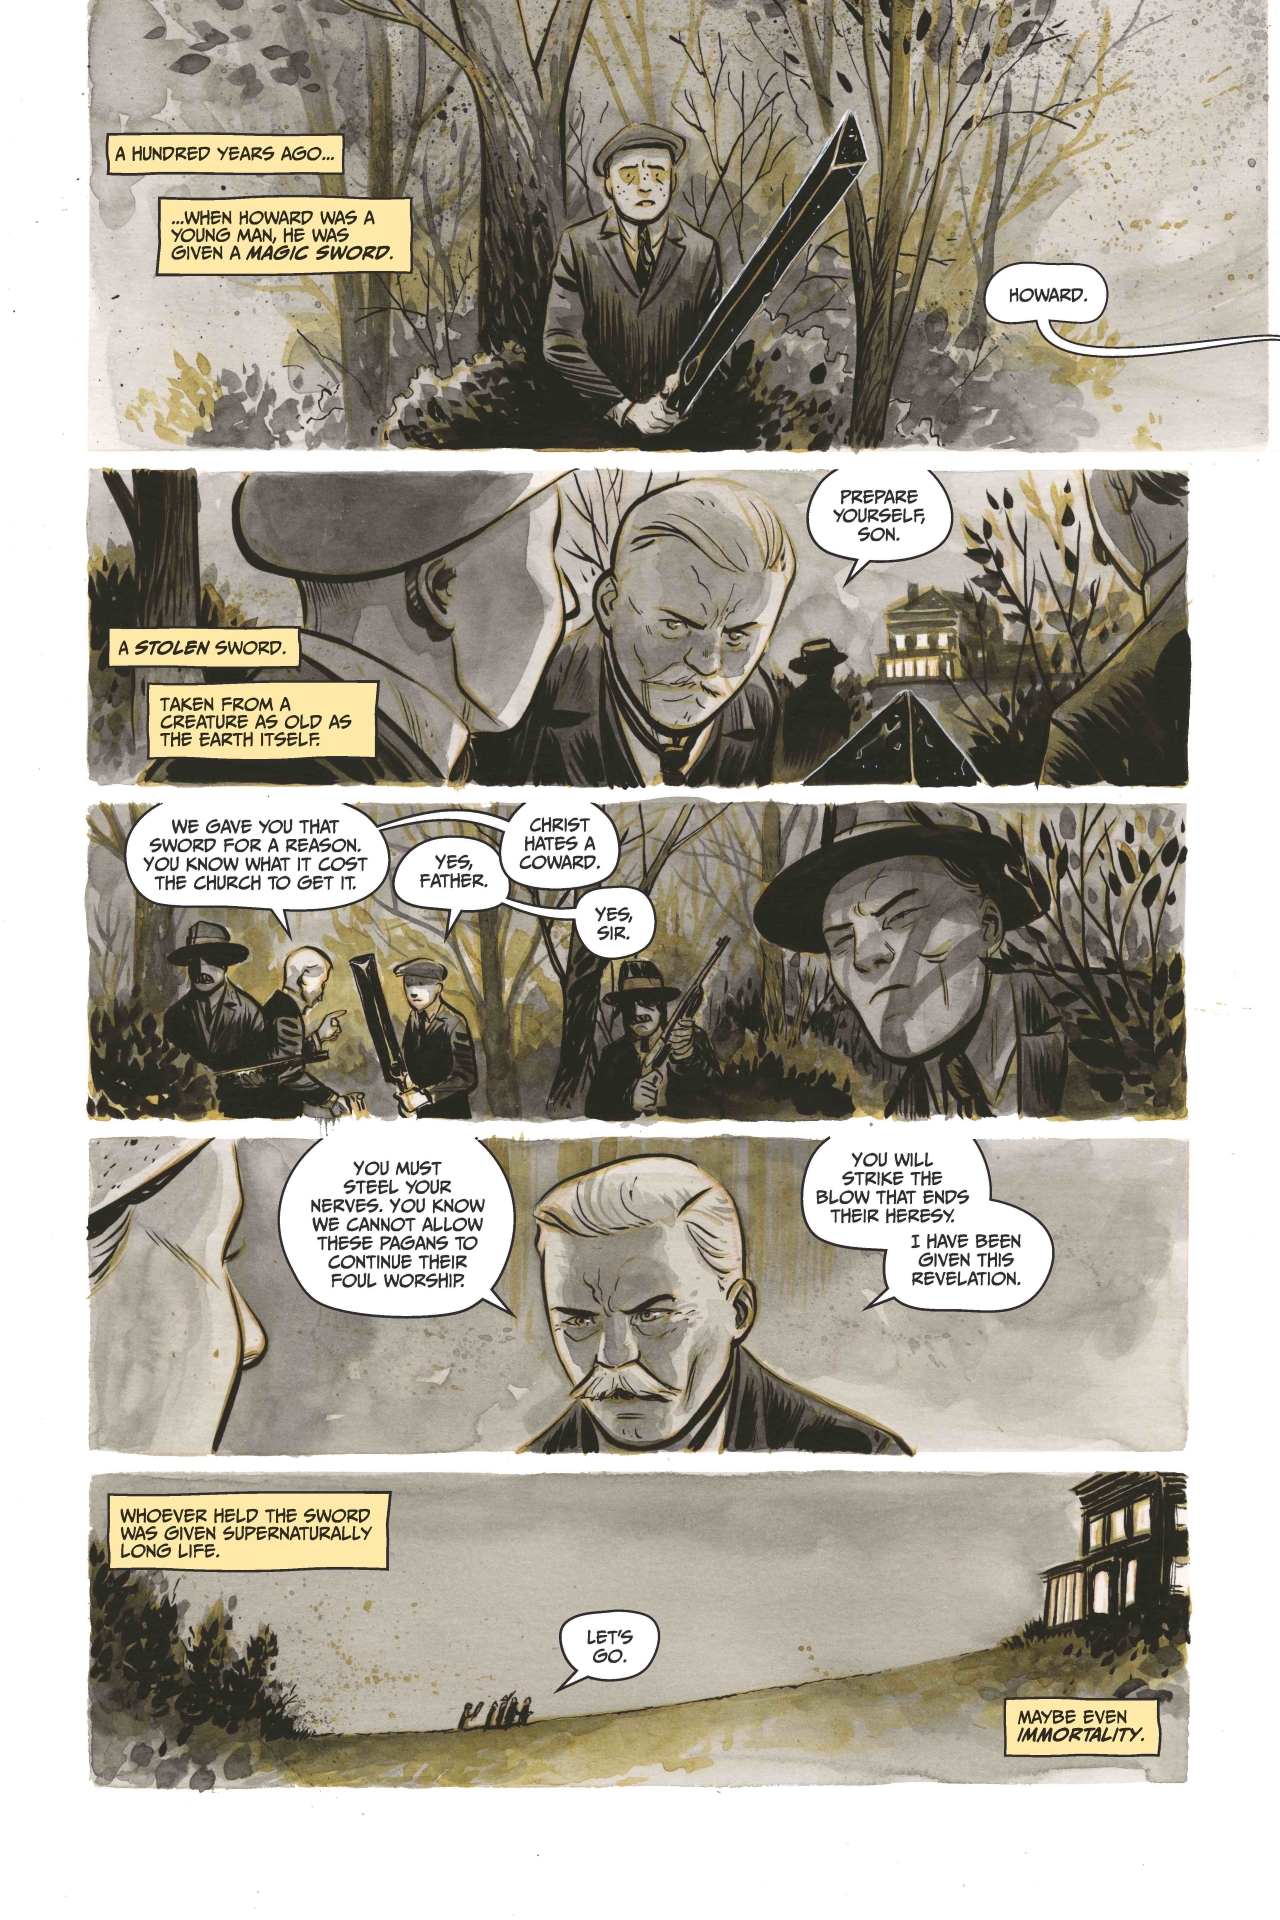 The Lonesome Hunters #1 page